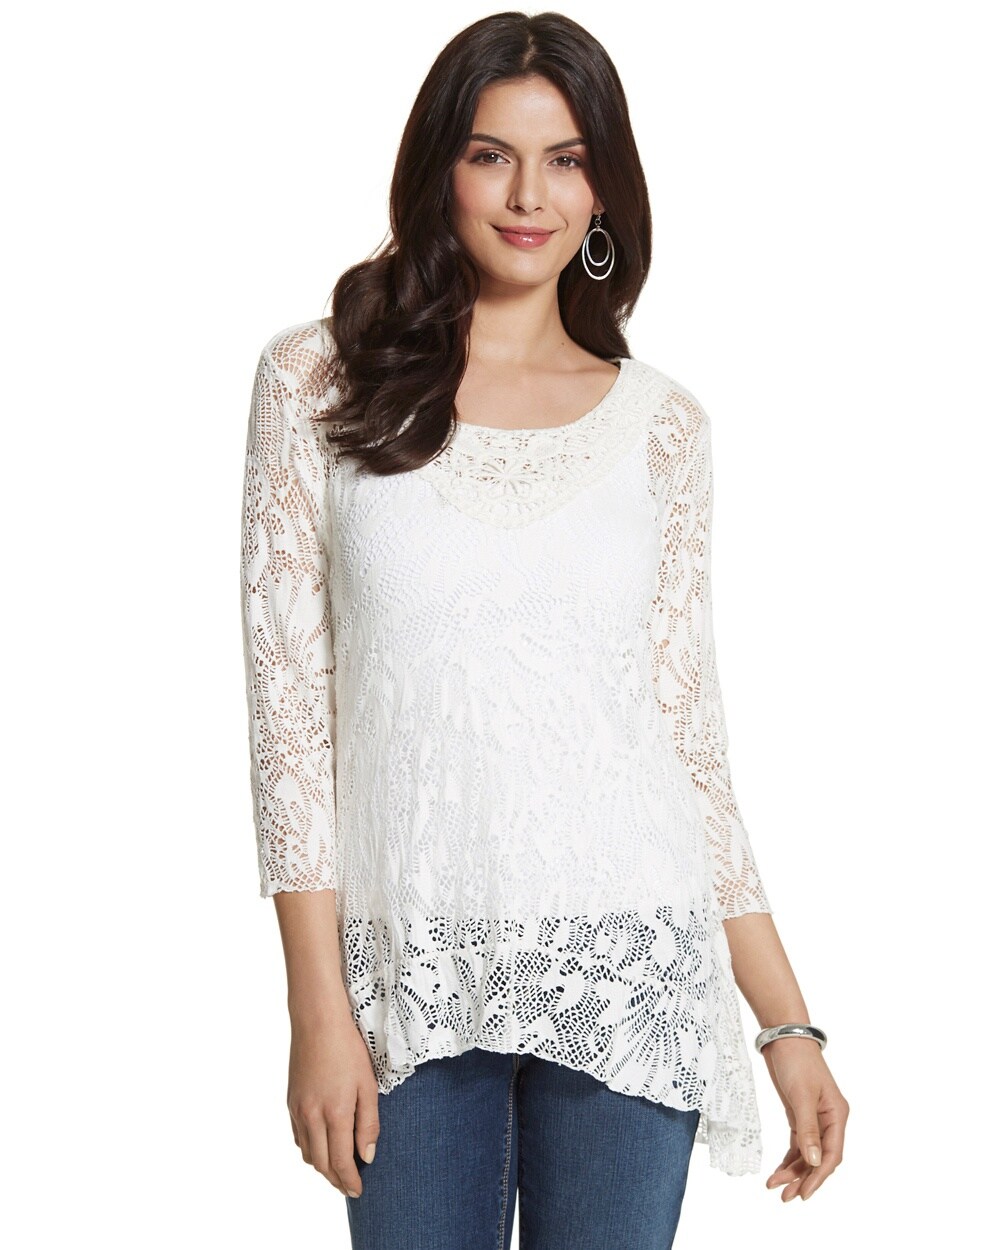 Willow Lace Top - Chico's